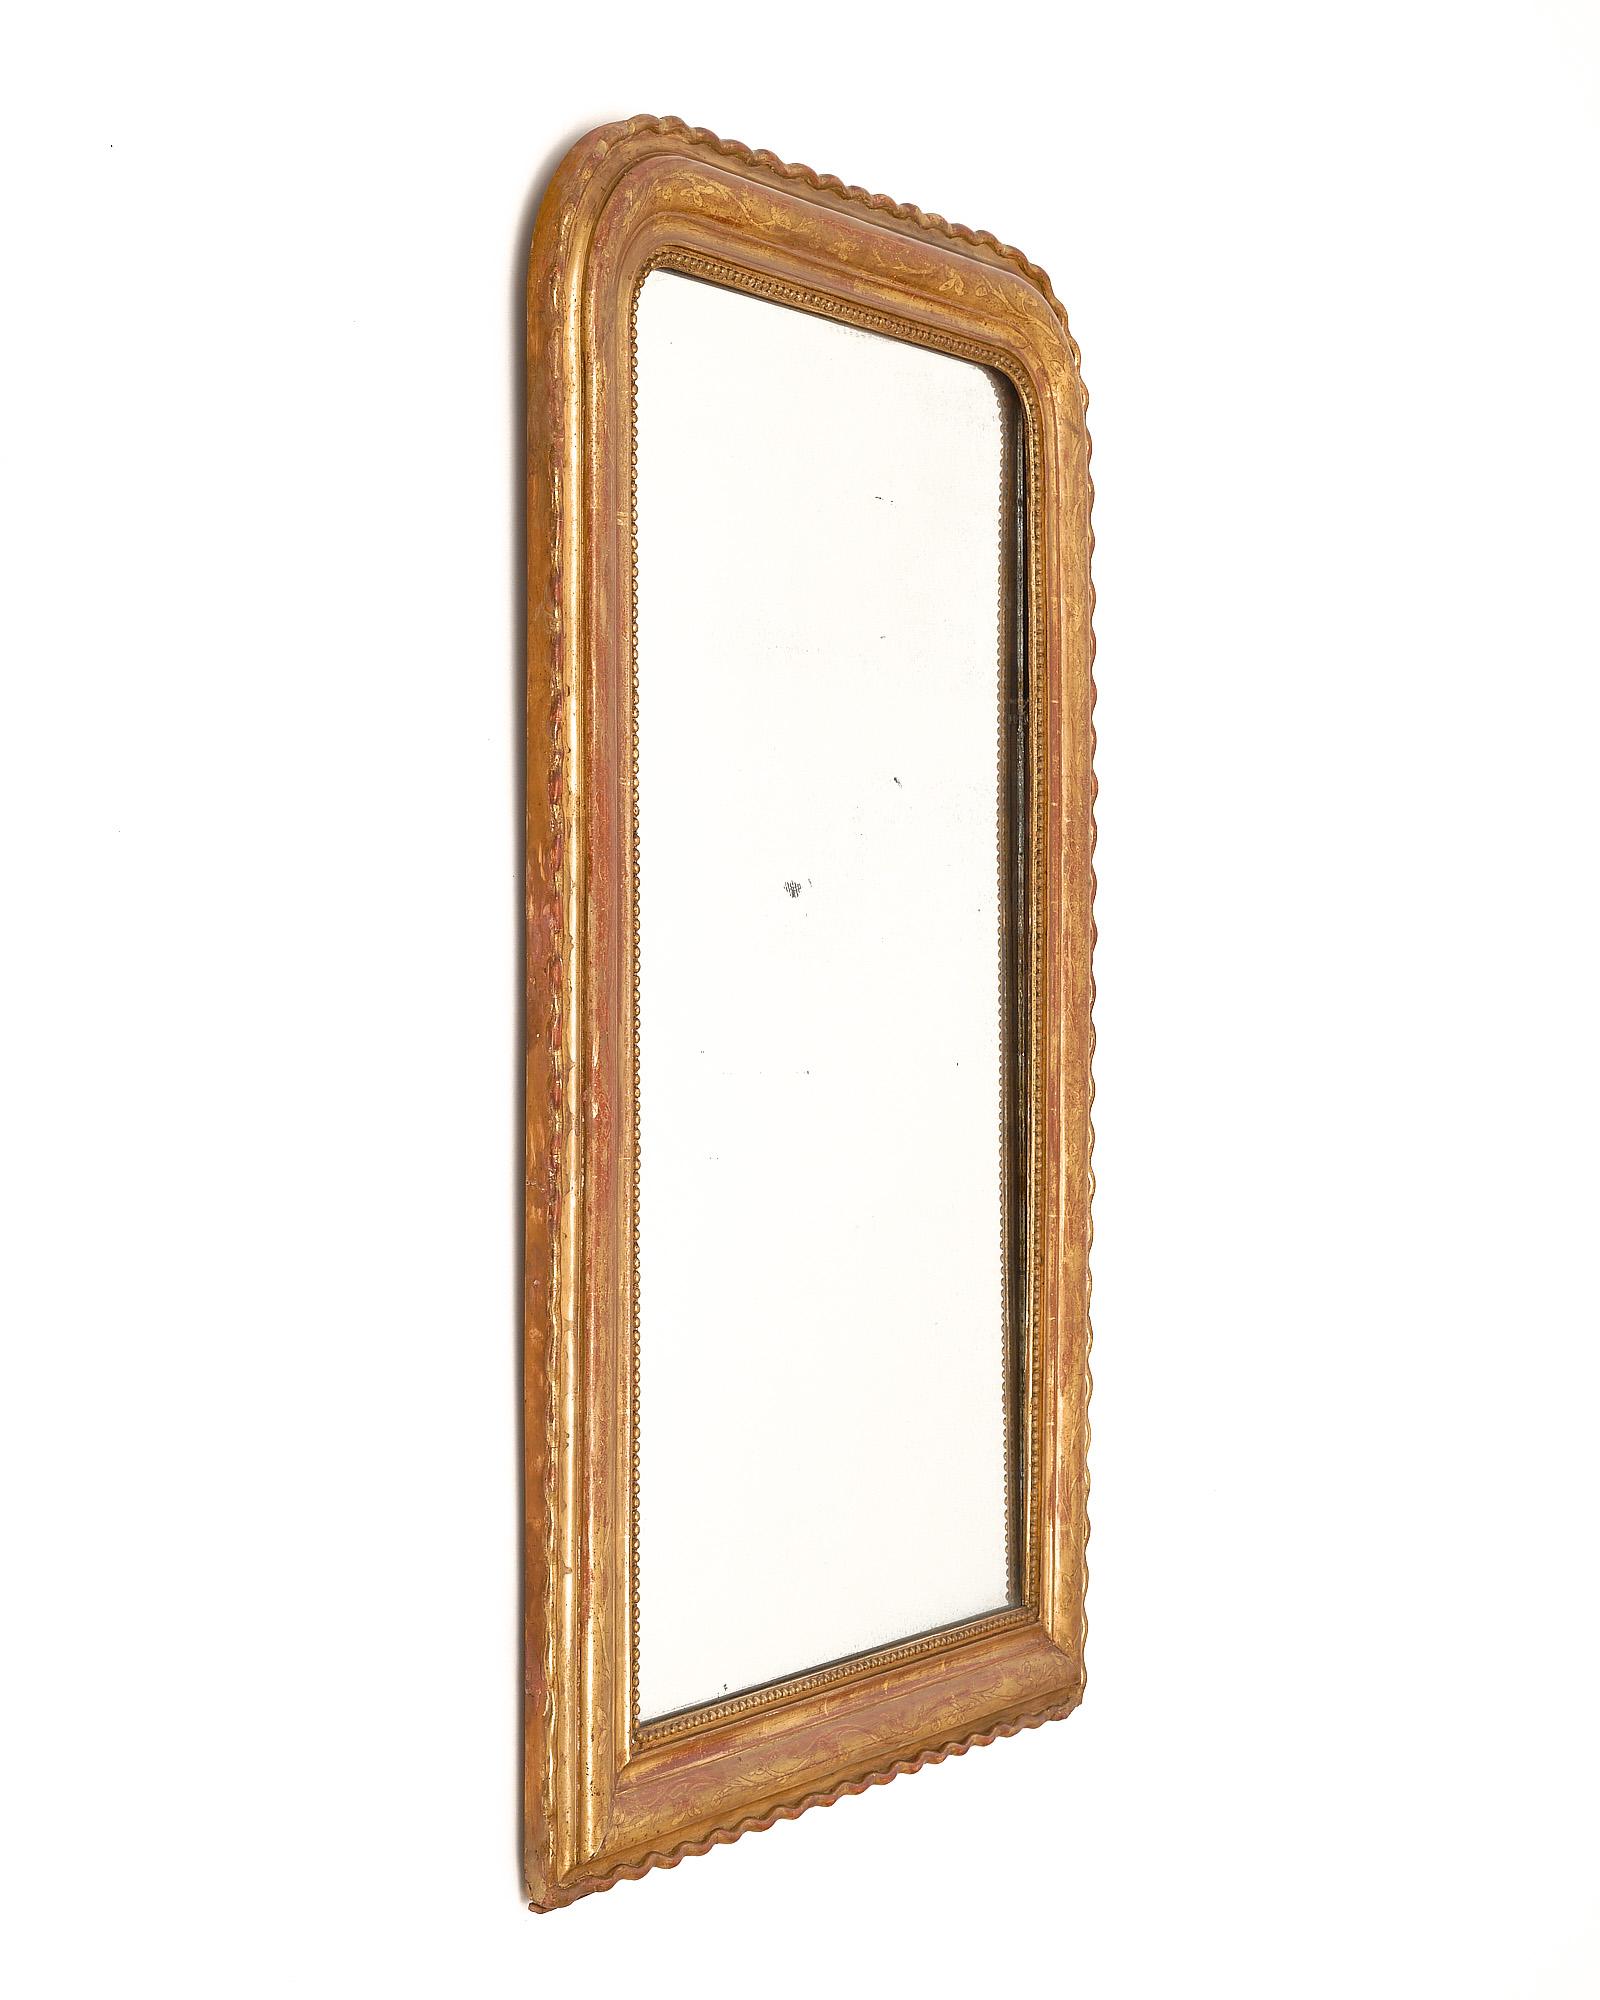 Mirror, French, from the Louis Philippe period. This mirror is made of solid wood, hand carved, and stuccoed. The neoclassical mirror features floral chiseling and the undertone sienna glaze is covered with a patinated 23 carat gold leafing. We were